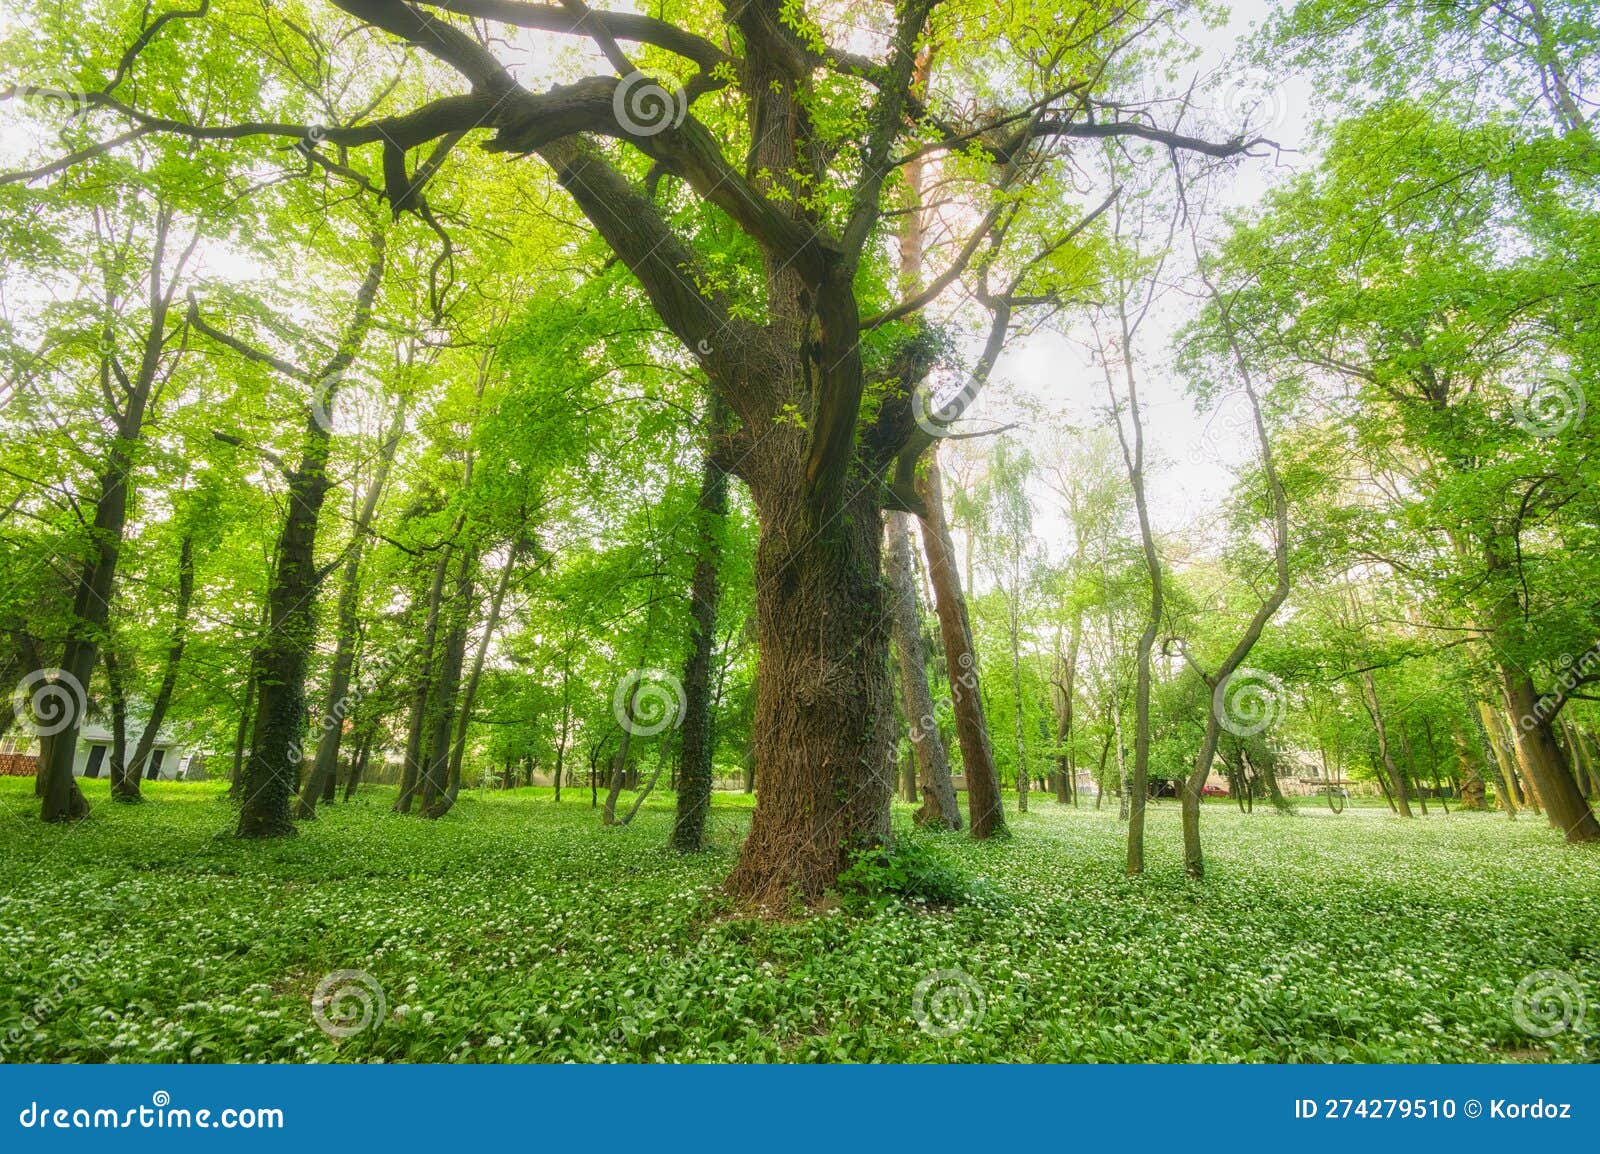 blossoming wild garlic and old tree in the park in nova ves nad zitavou village